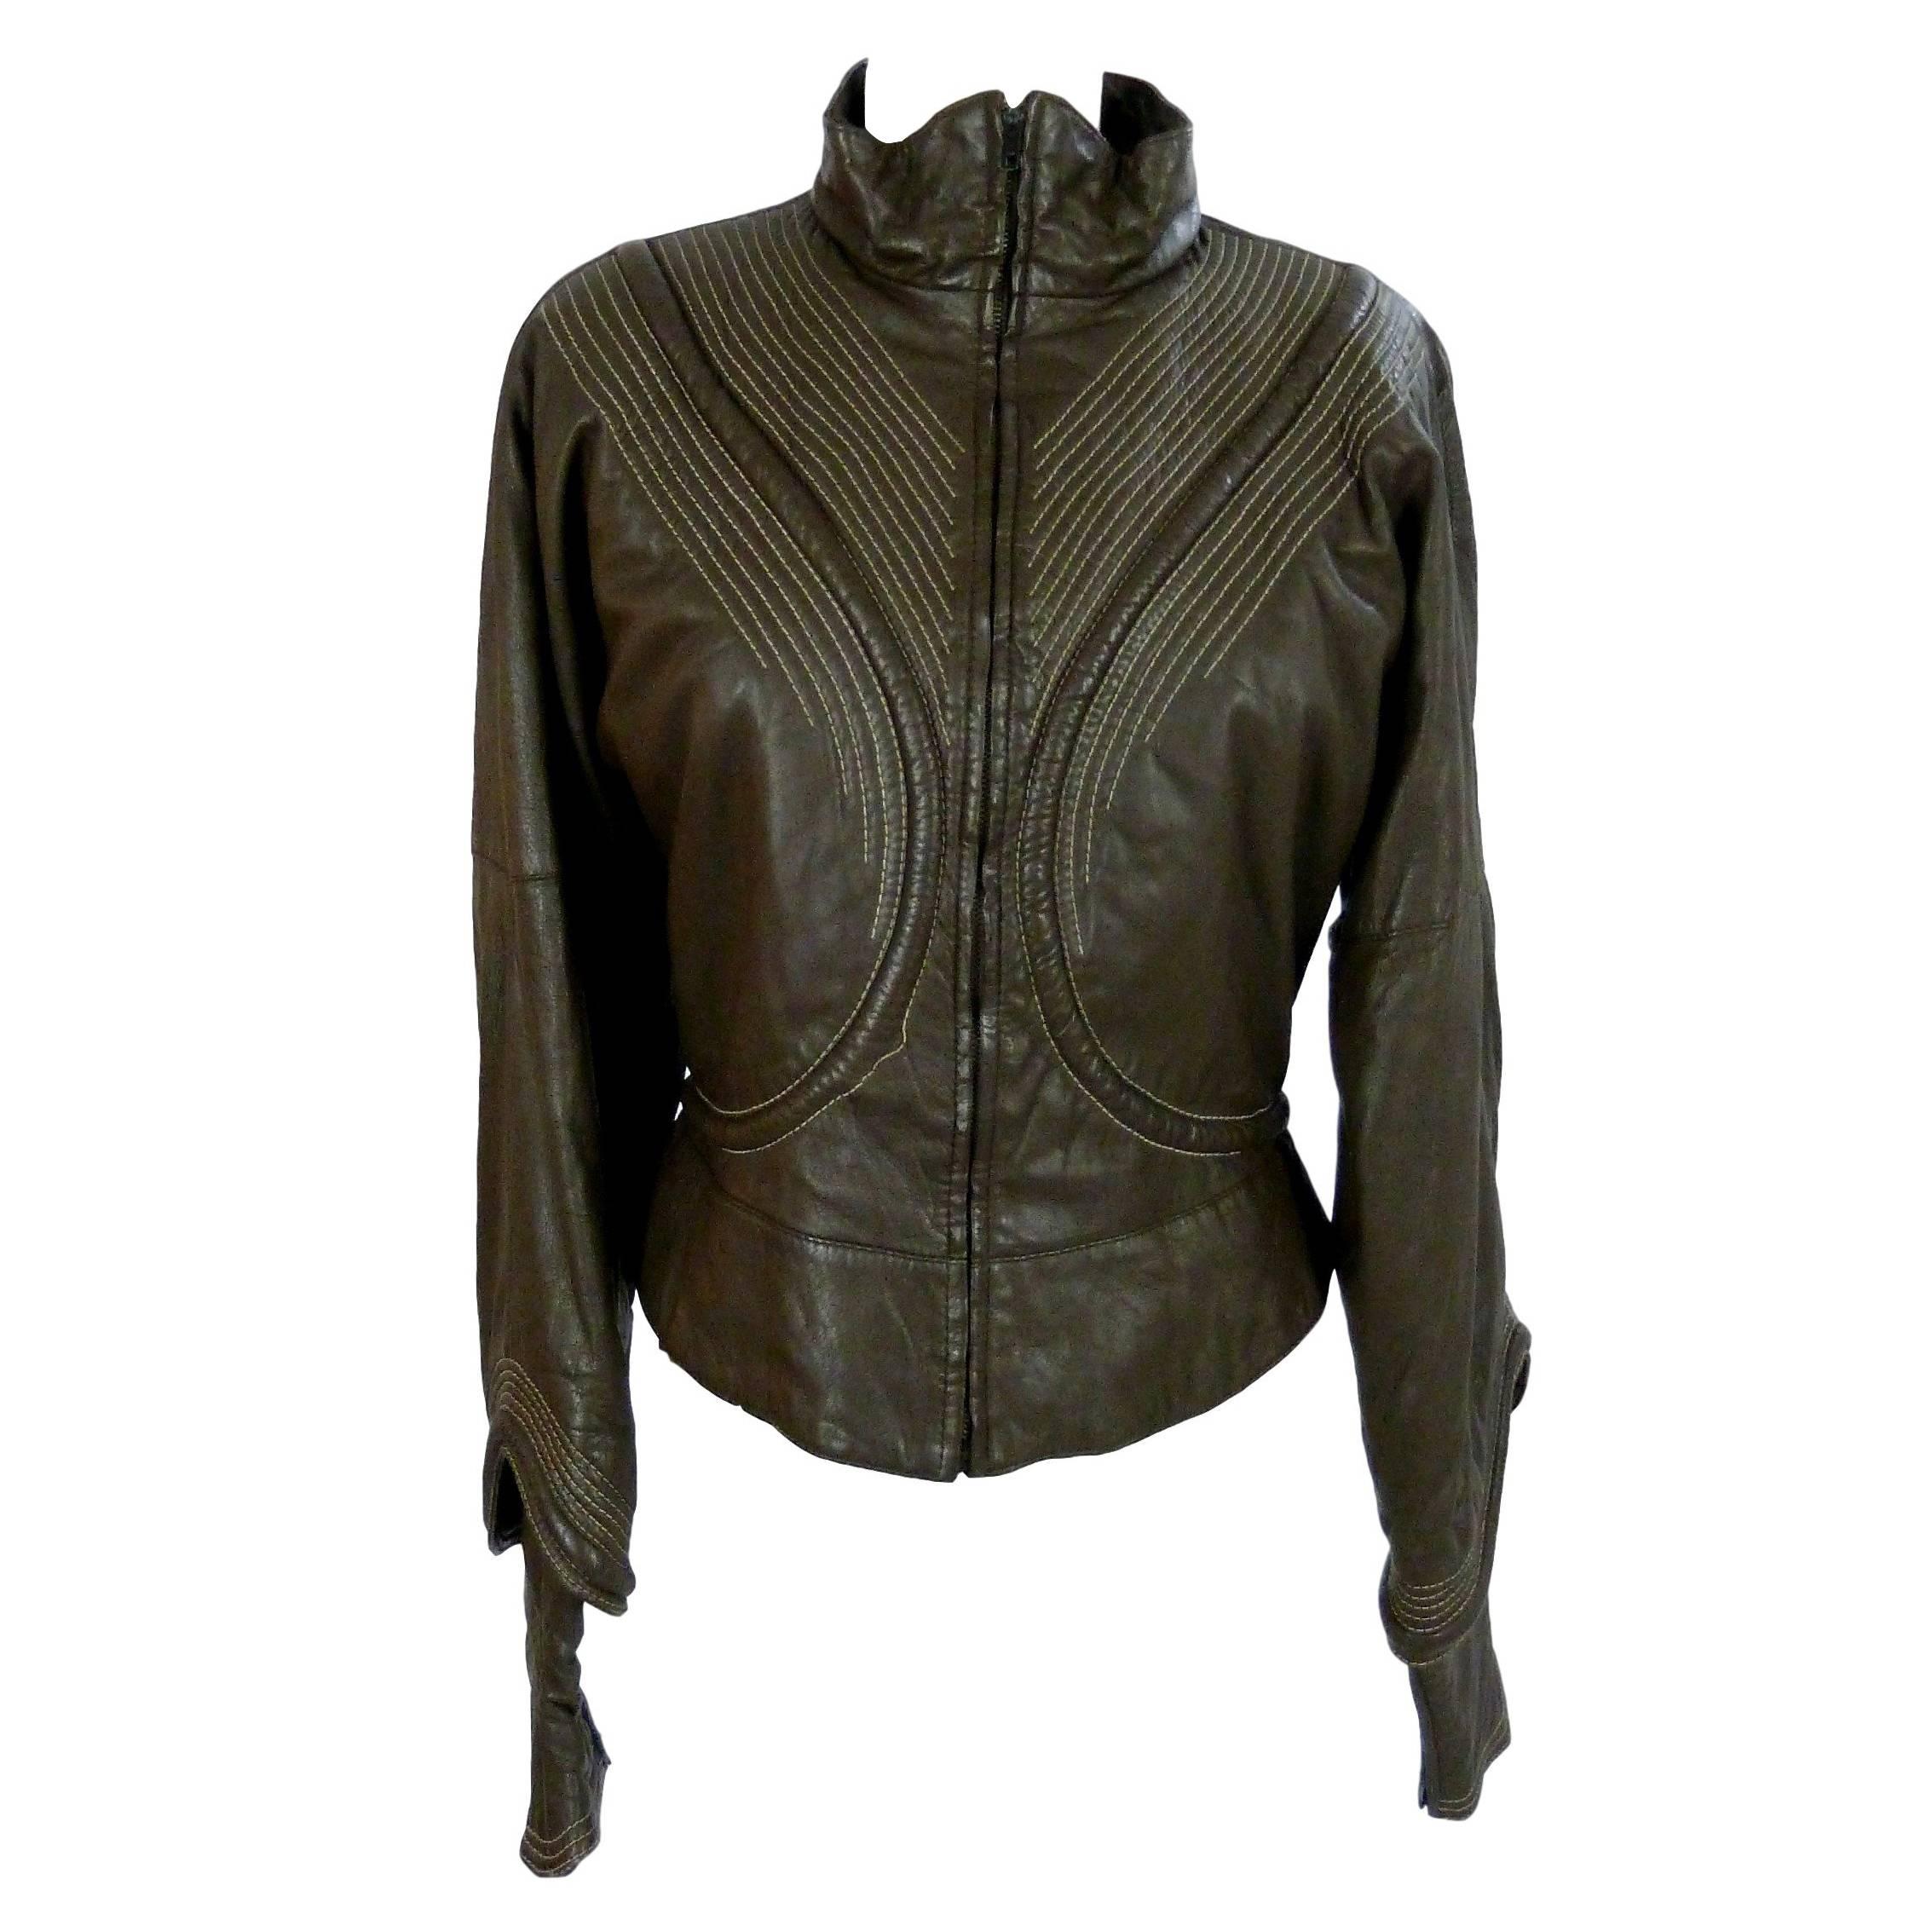 Gianfranco Ferrè vintage 1980s women's brown leather motorcycle jacket size 46 For Sale